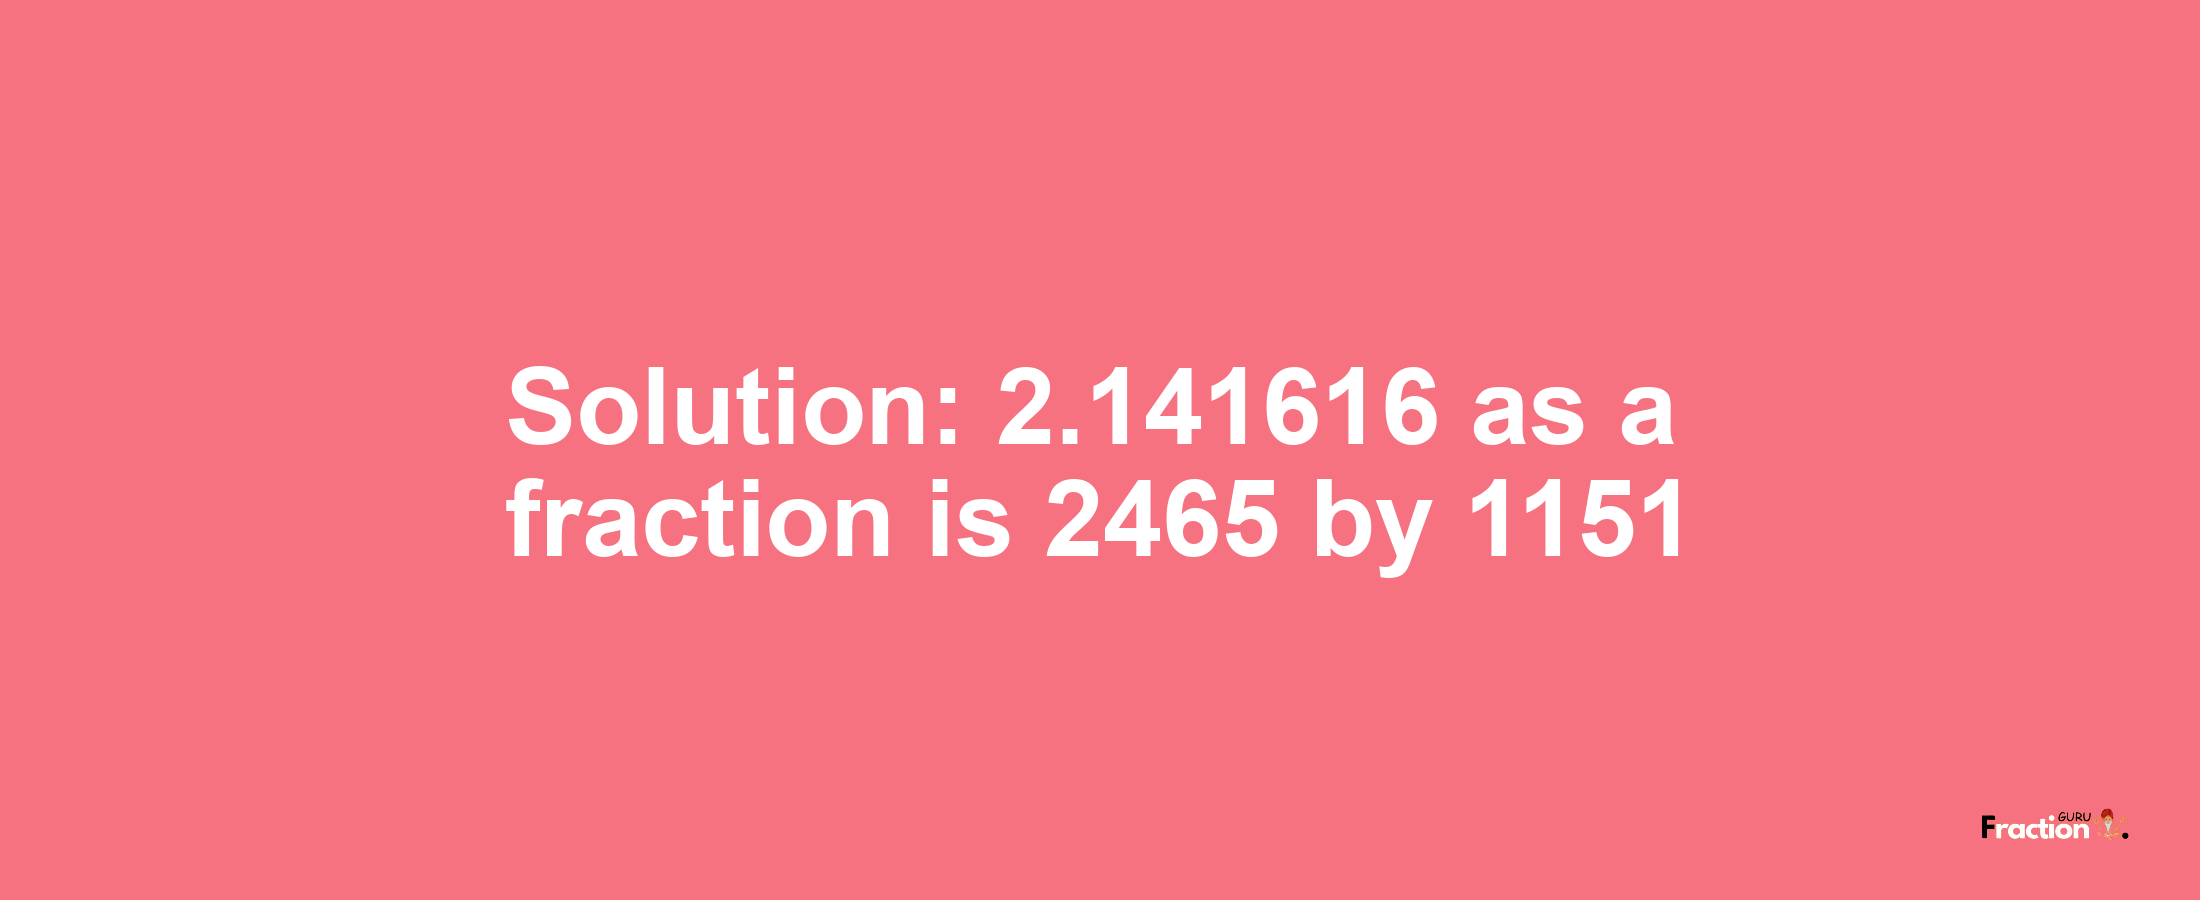 Solution:2.141616 as a fraction is 2465/1151